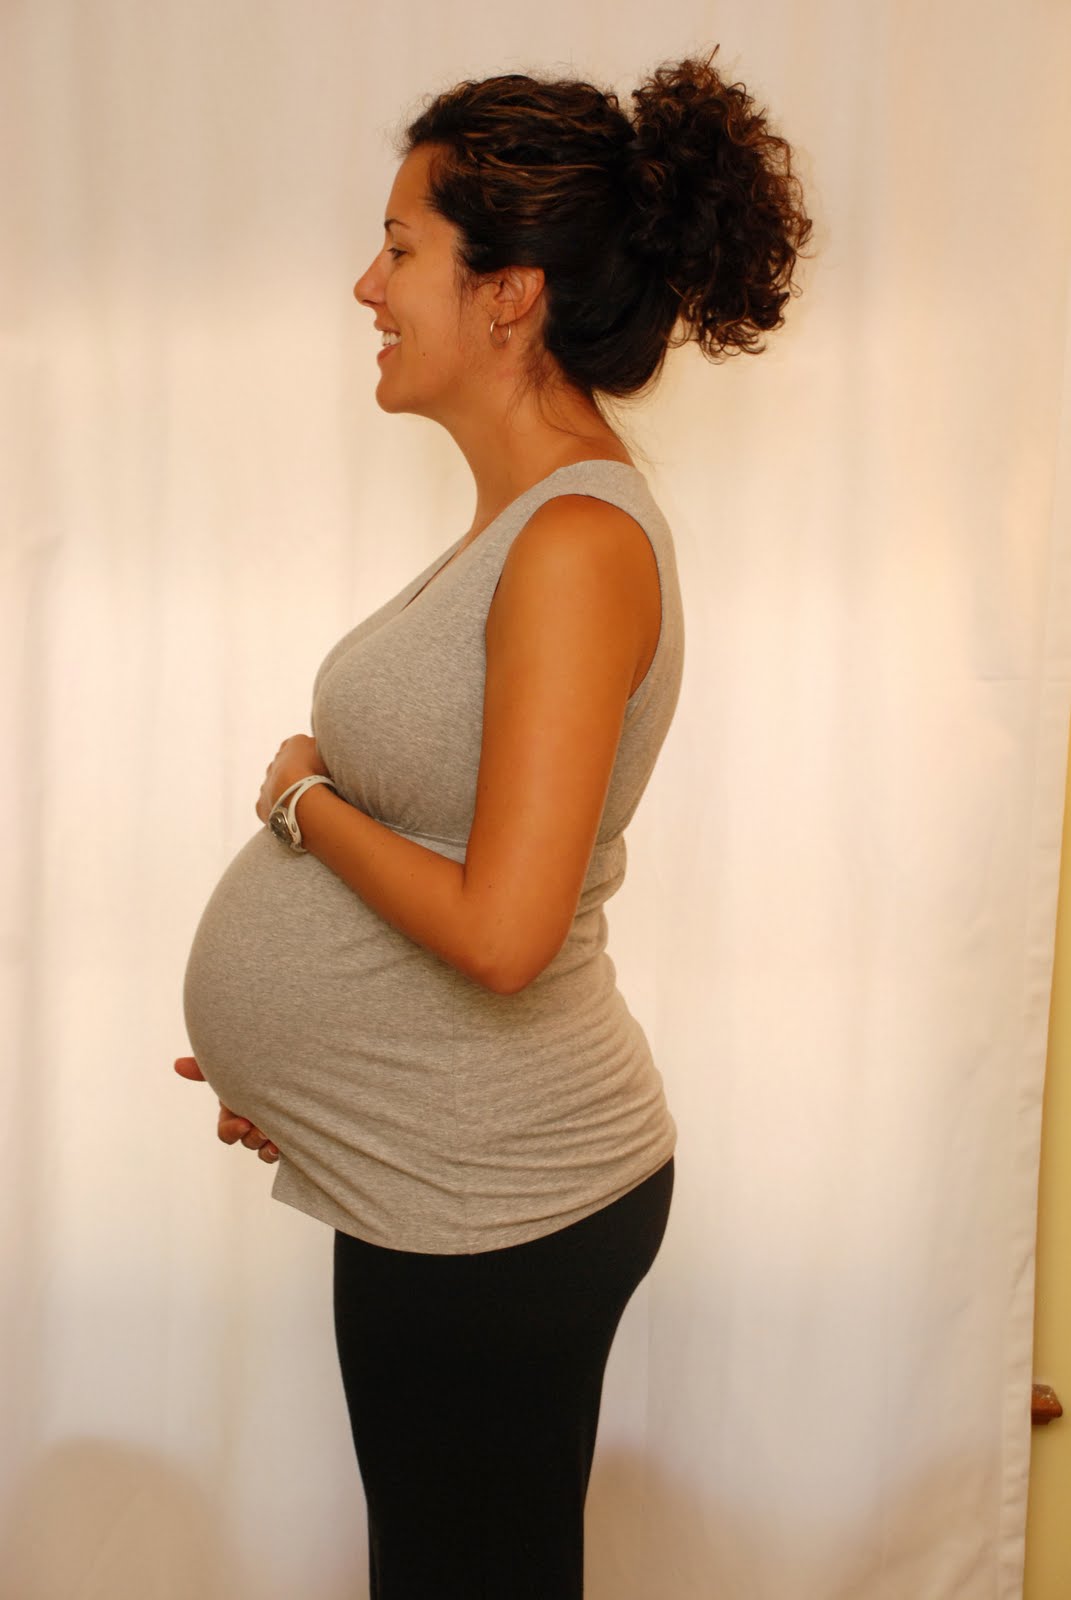 Baby Development At 38 Weeks: A Peek Into Your Baby’s World